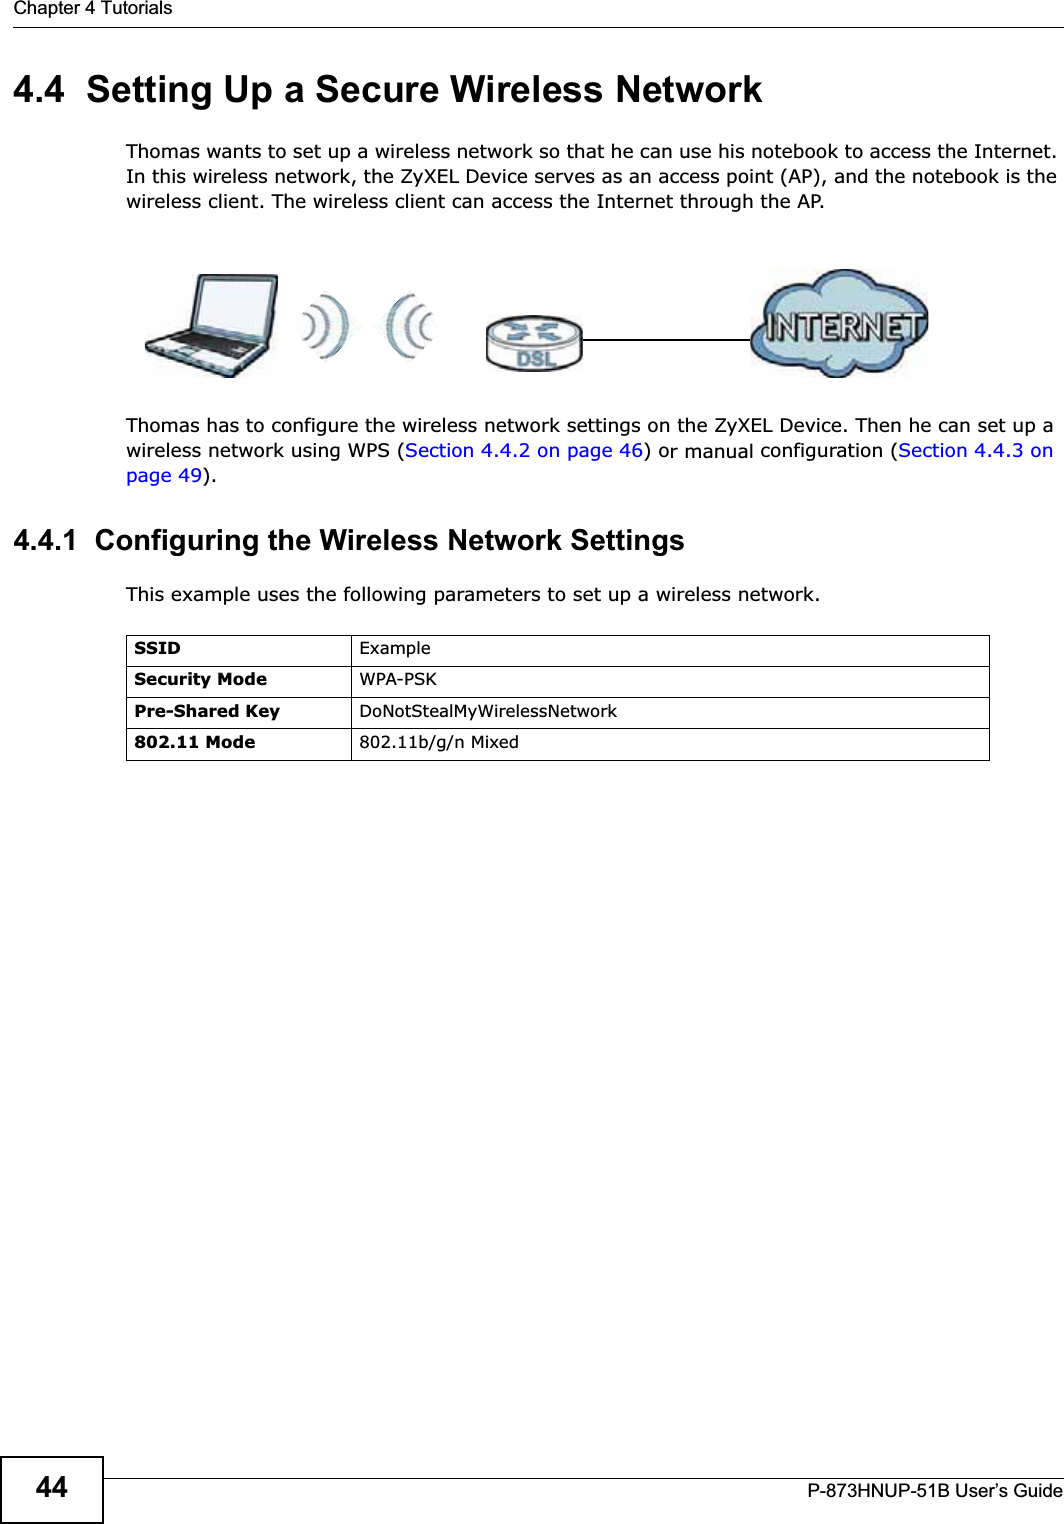 Chapter 4 TutorialsP-873HNUP-51B User’s Guide444.4  Setting Up a Secure Wireless NetworkThomas wants to set up a wireless network so that he can use his notebook to access the Internet. In this wireless network, the ZyXEL Device serves as an access point (AP), and the notebook is the wireless client. The wireless client can access the Internet through the AP.Thomas has to configure the wireless network settings on the ZyXEL Device. Then he can set up a wireless network using WPS (Section 4.4.2 on page 46) or manual configuration (Section 4.4.3 on page 49).4.4.1  Configuring the Wireless Network SettingsThis example uses the following parameters to set up a wireless network.SSID ExampleSecurity Mode WPA-PSKPre-Shared Key DoNotStealMyWirelessNetwork802.11 Mode 802.11b/g/n Mixed